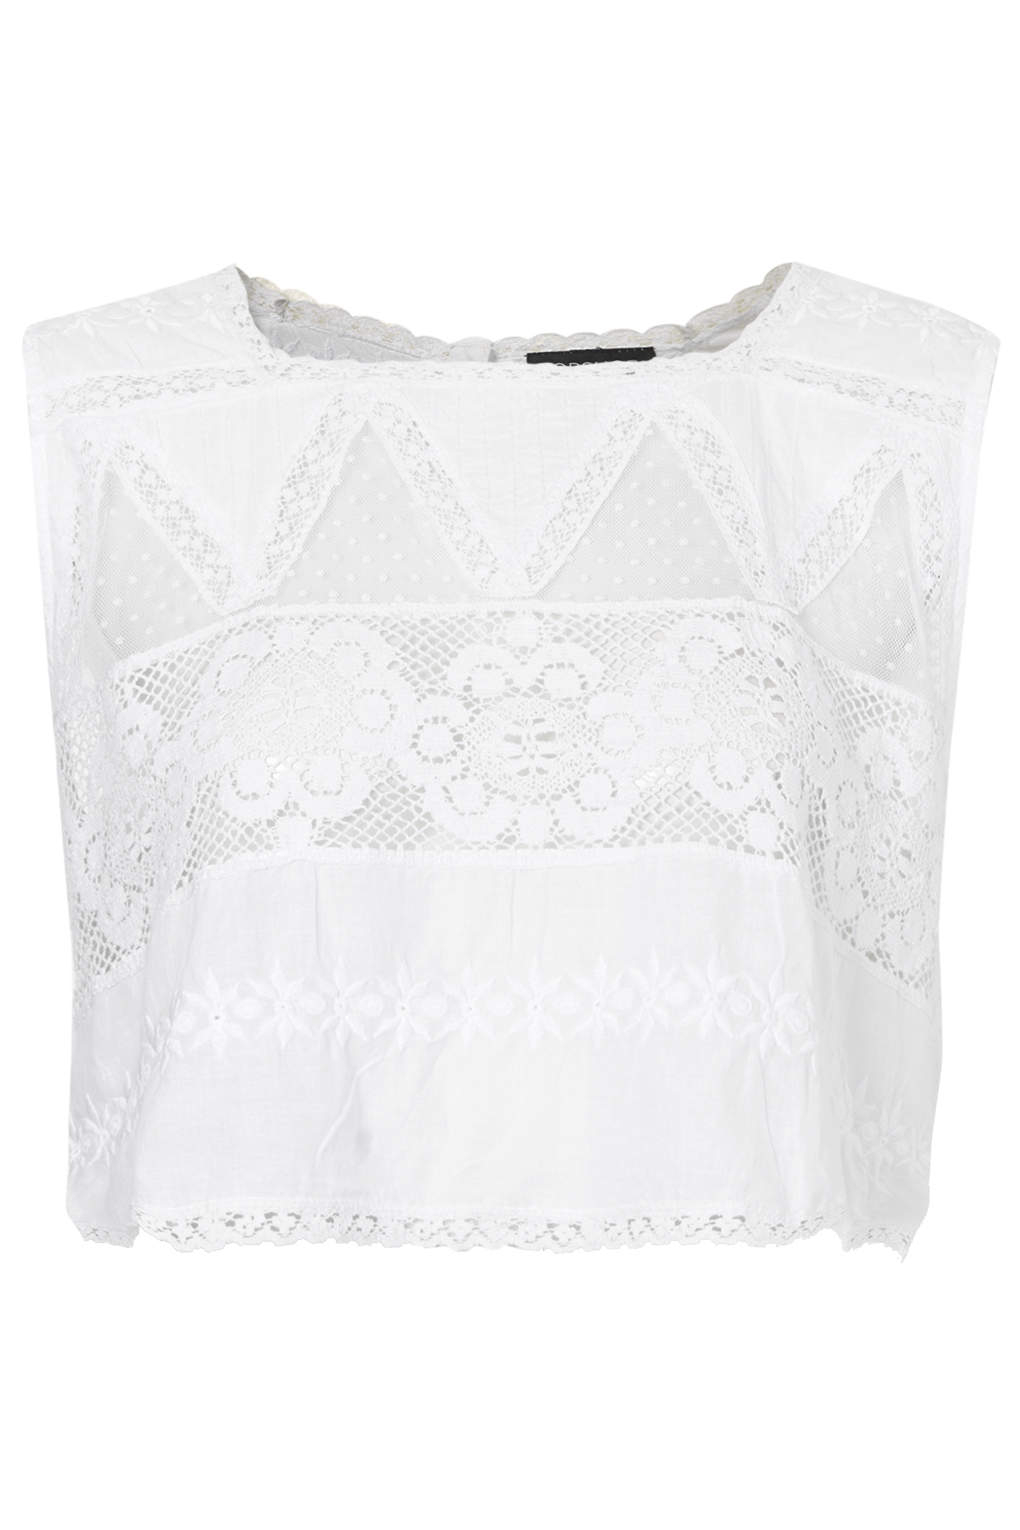 Lyst - Topshop Cotton Embroidered Blouse in White